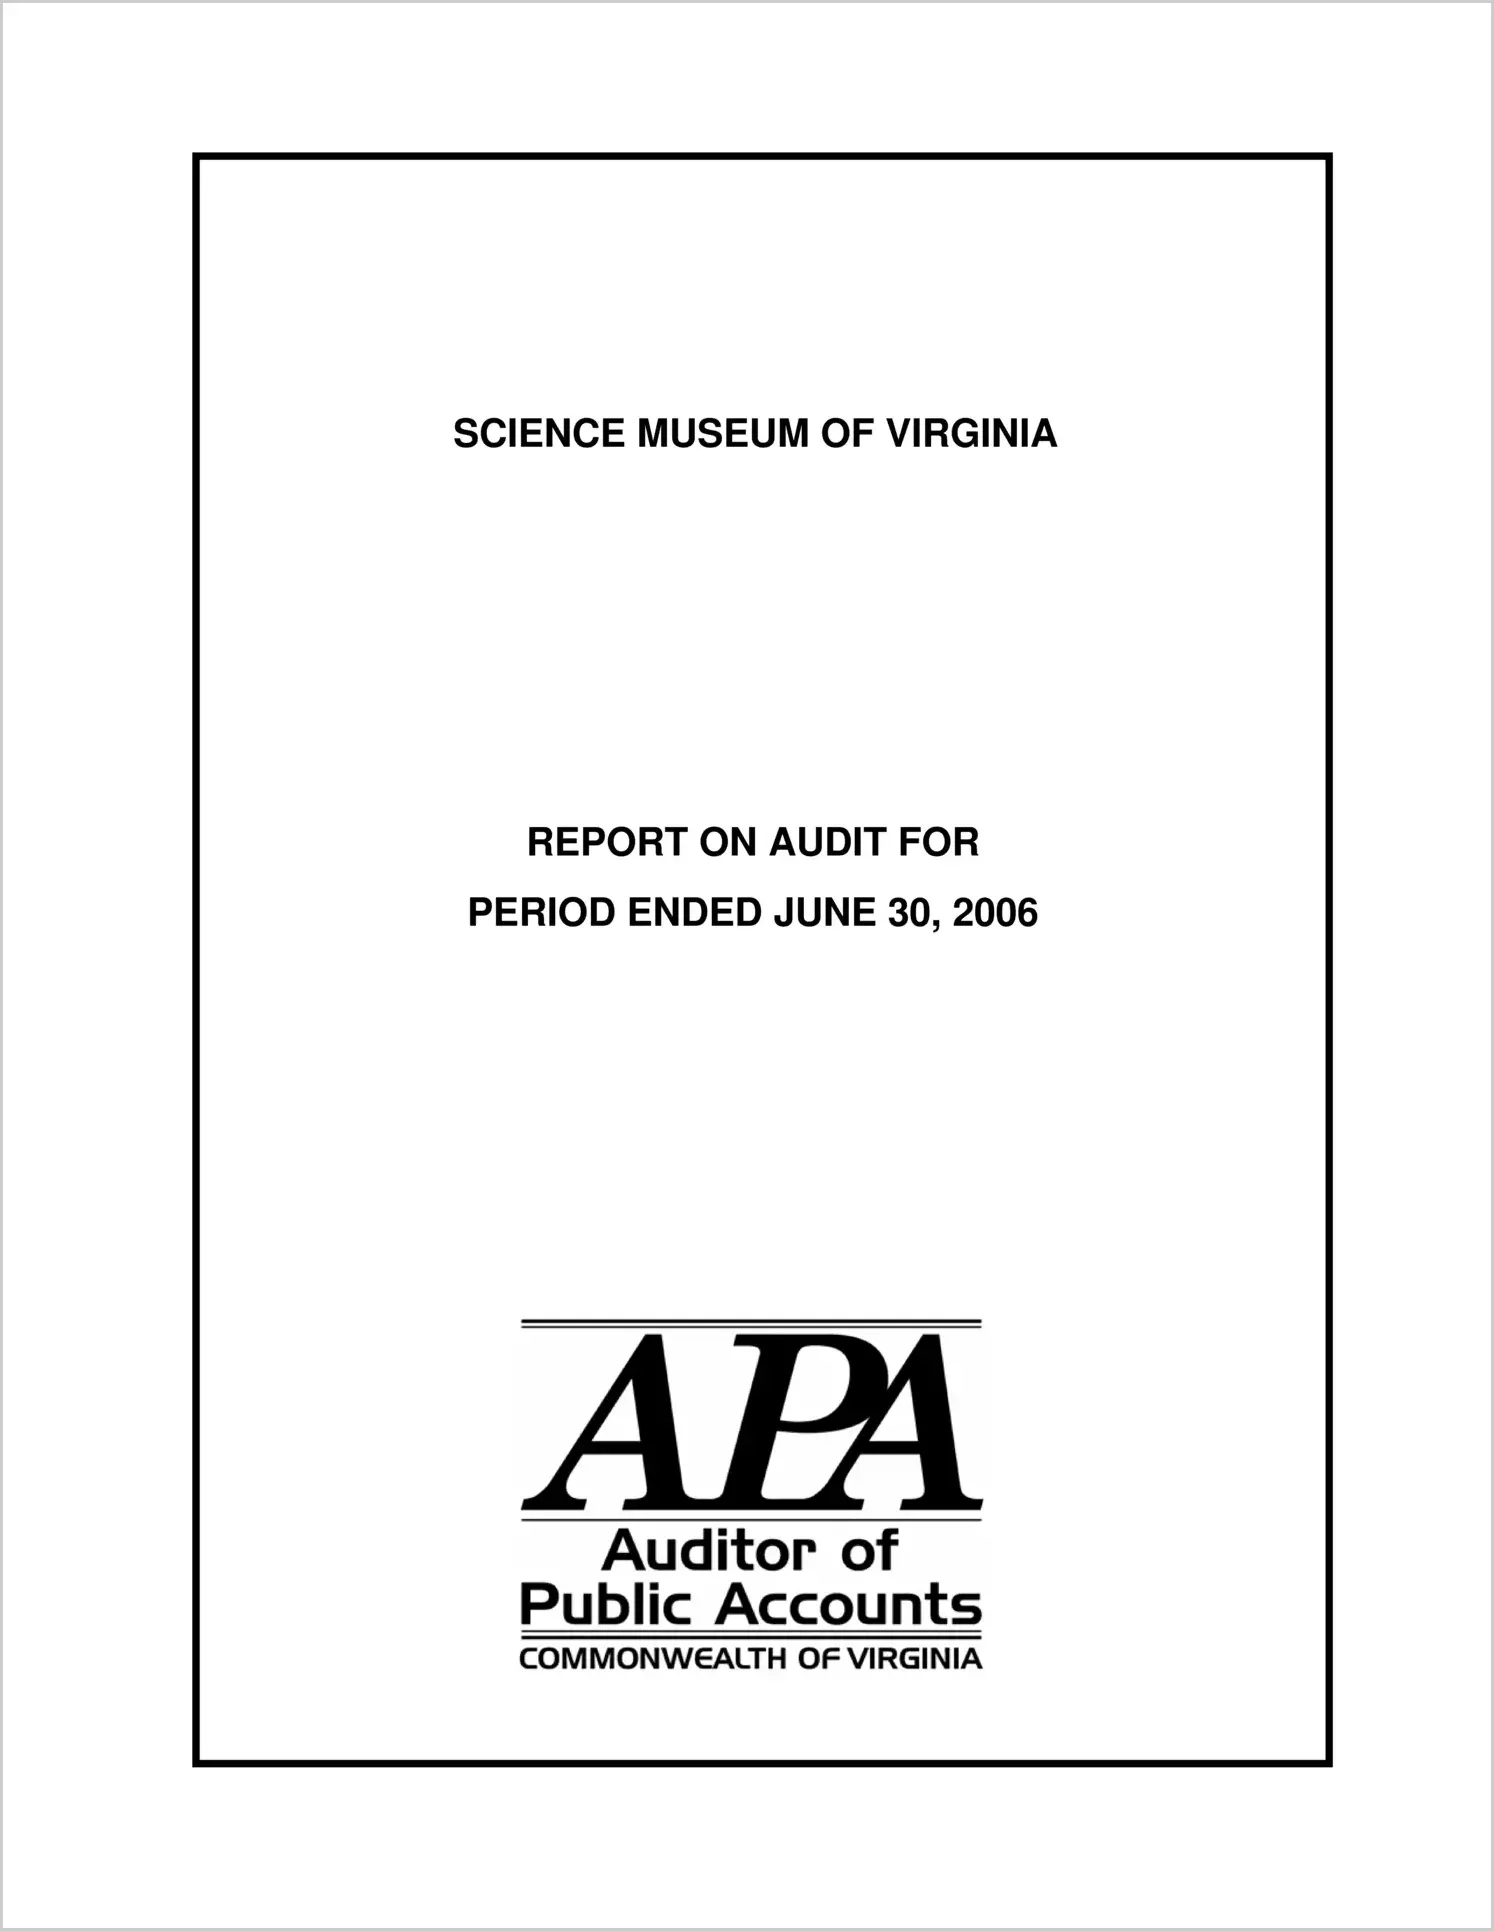 Science Museum of Virginia Report on Audit for period ended June 30, 2006